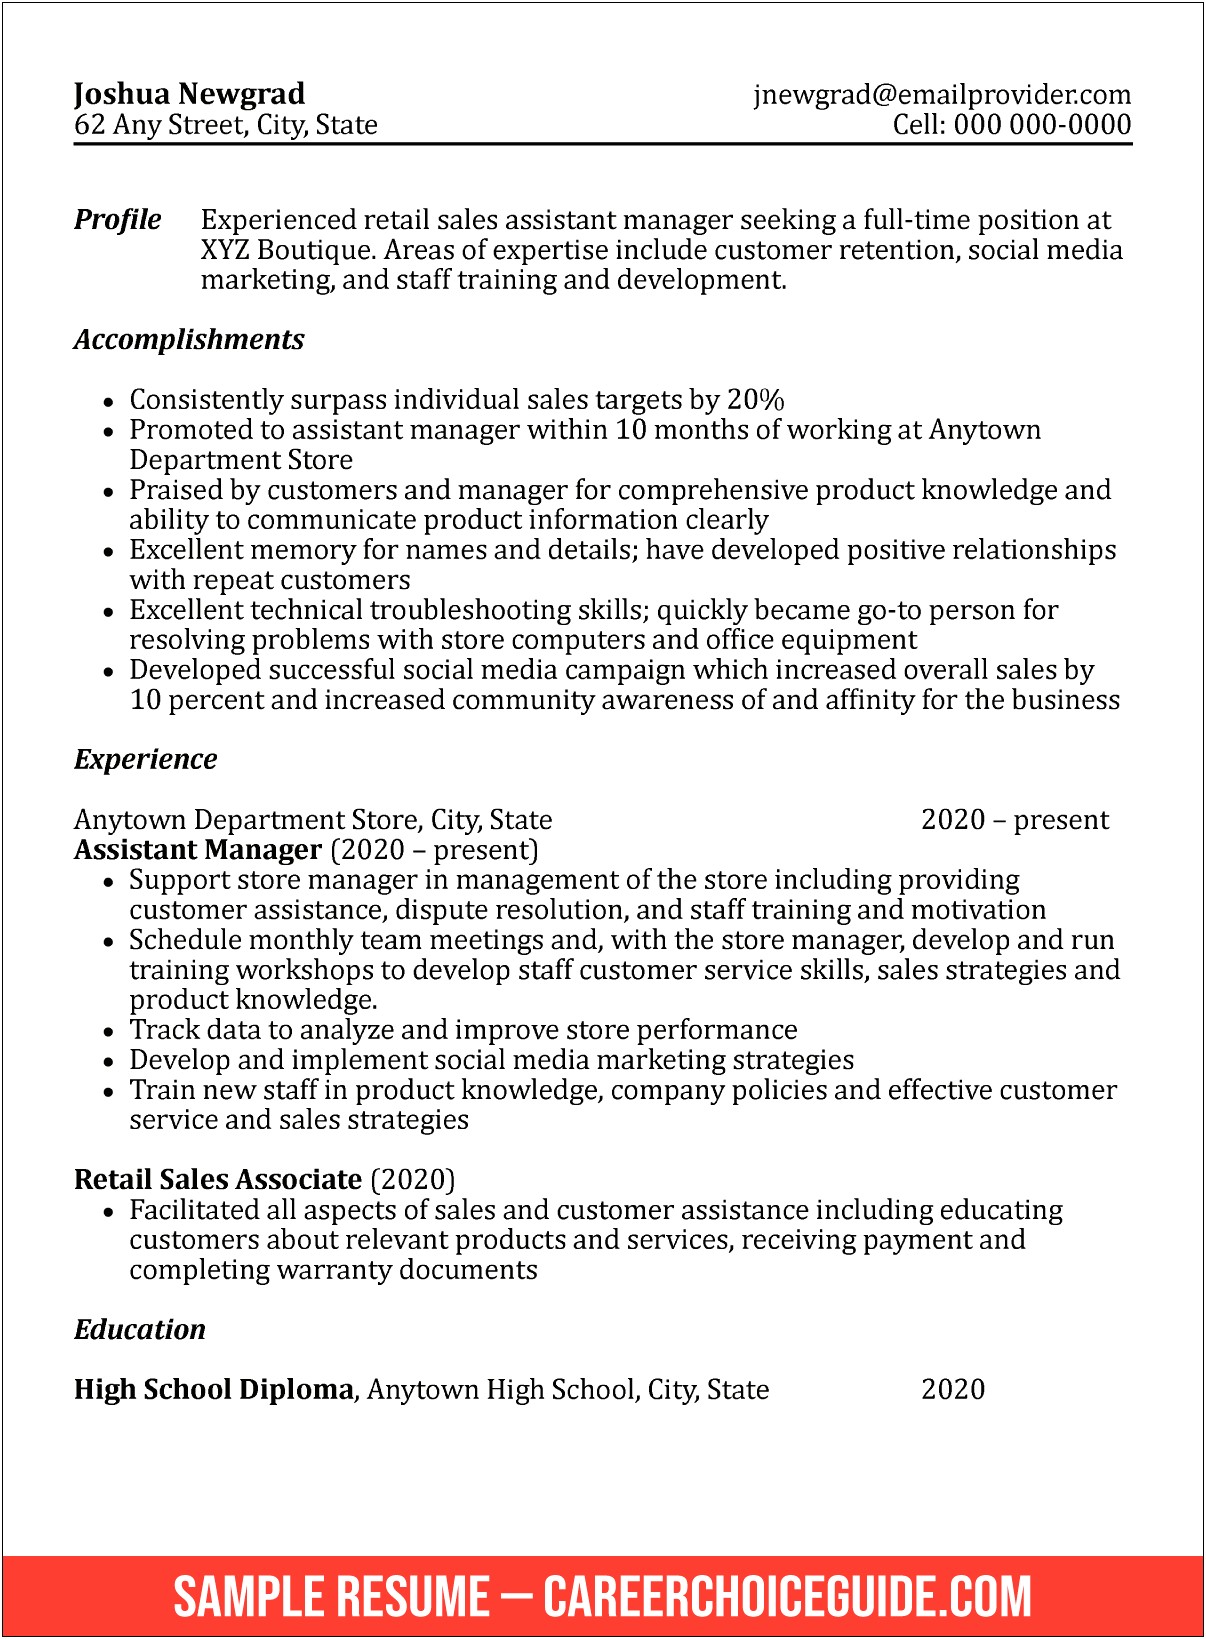 Objective Statement For Graduate School Resume Example